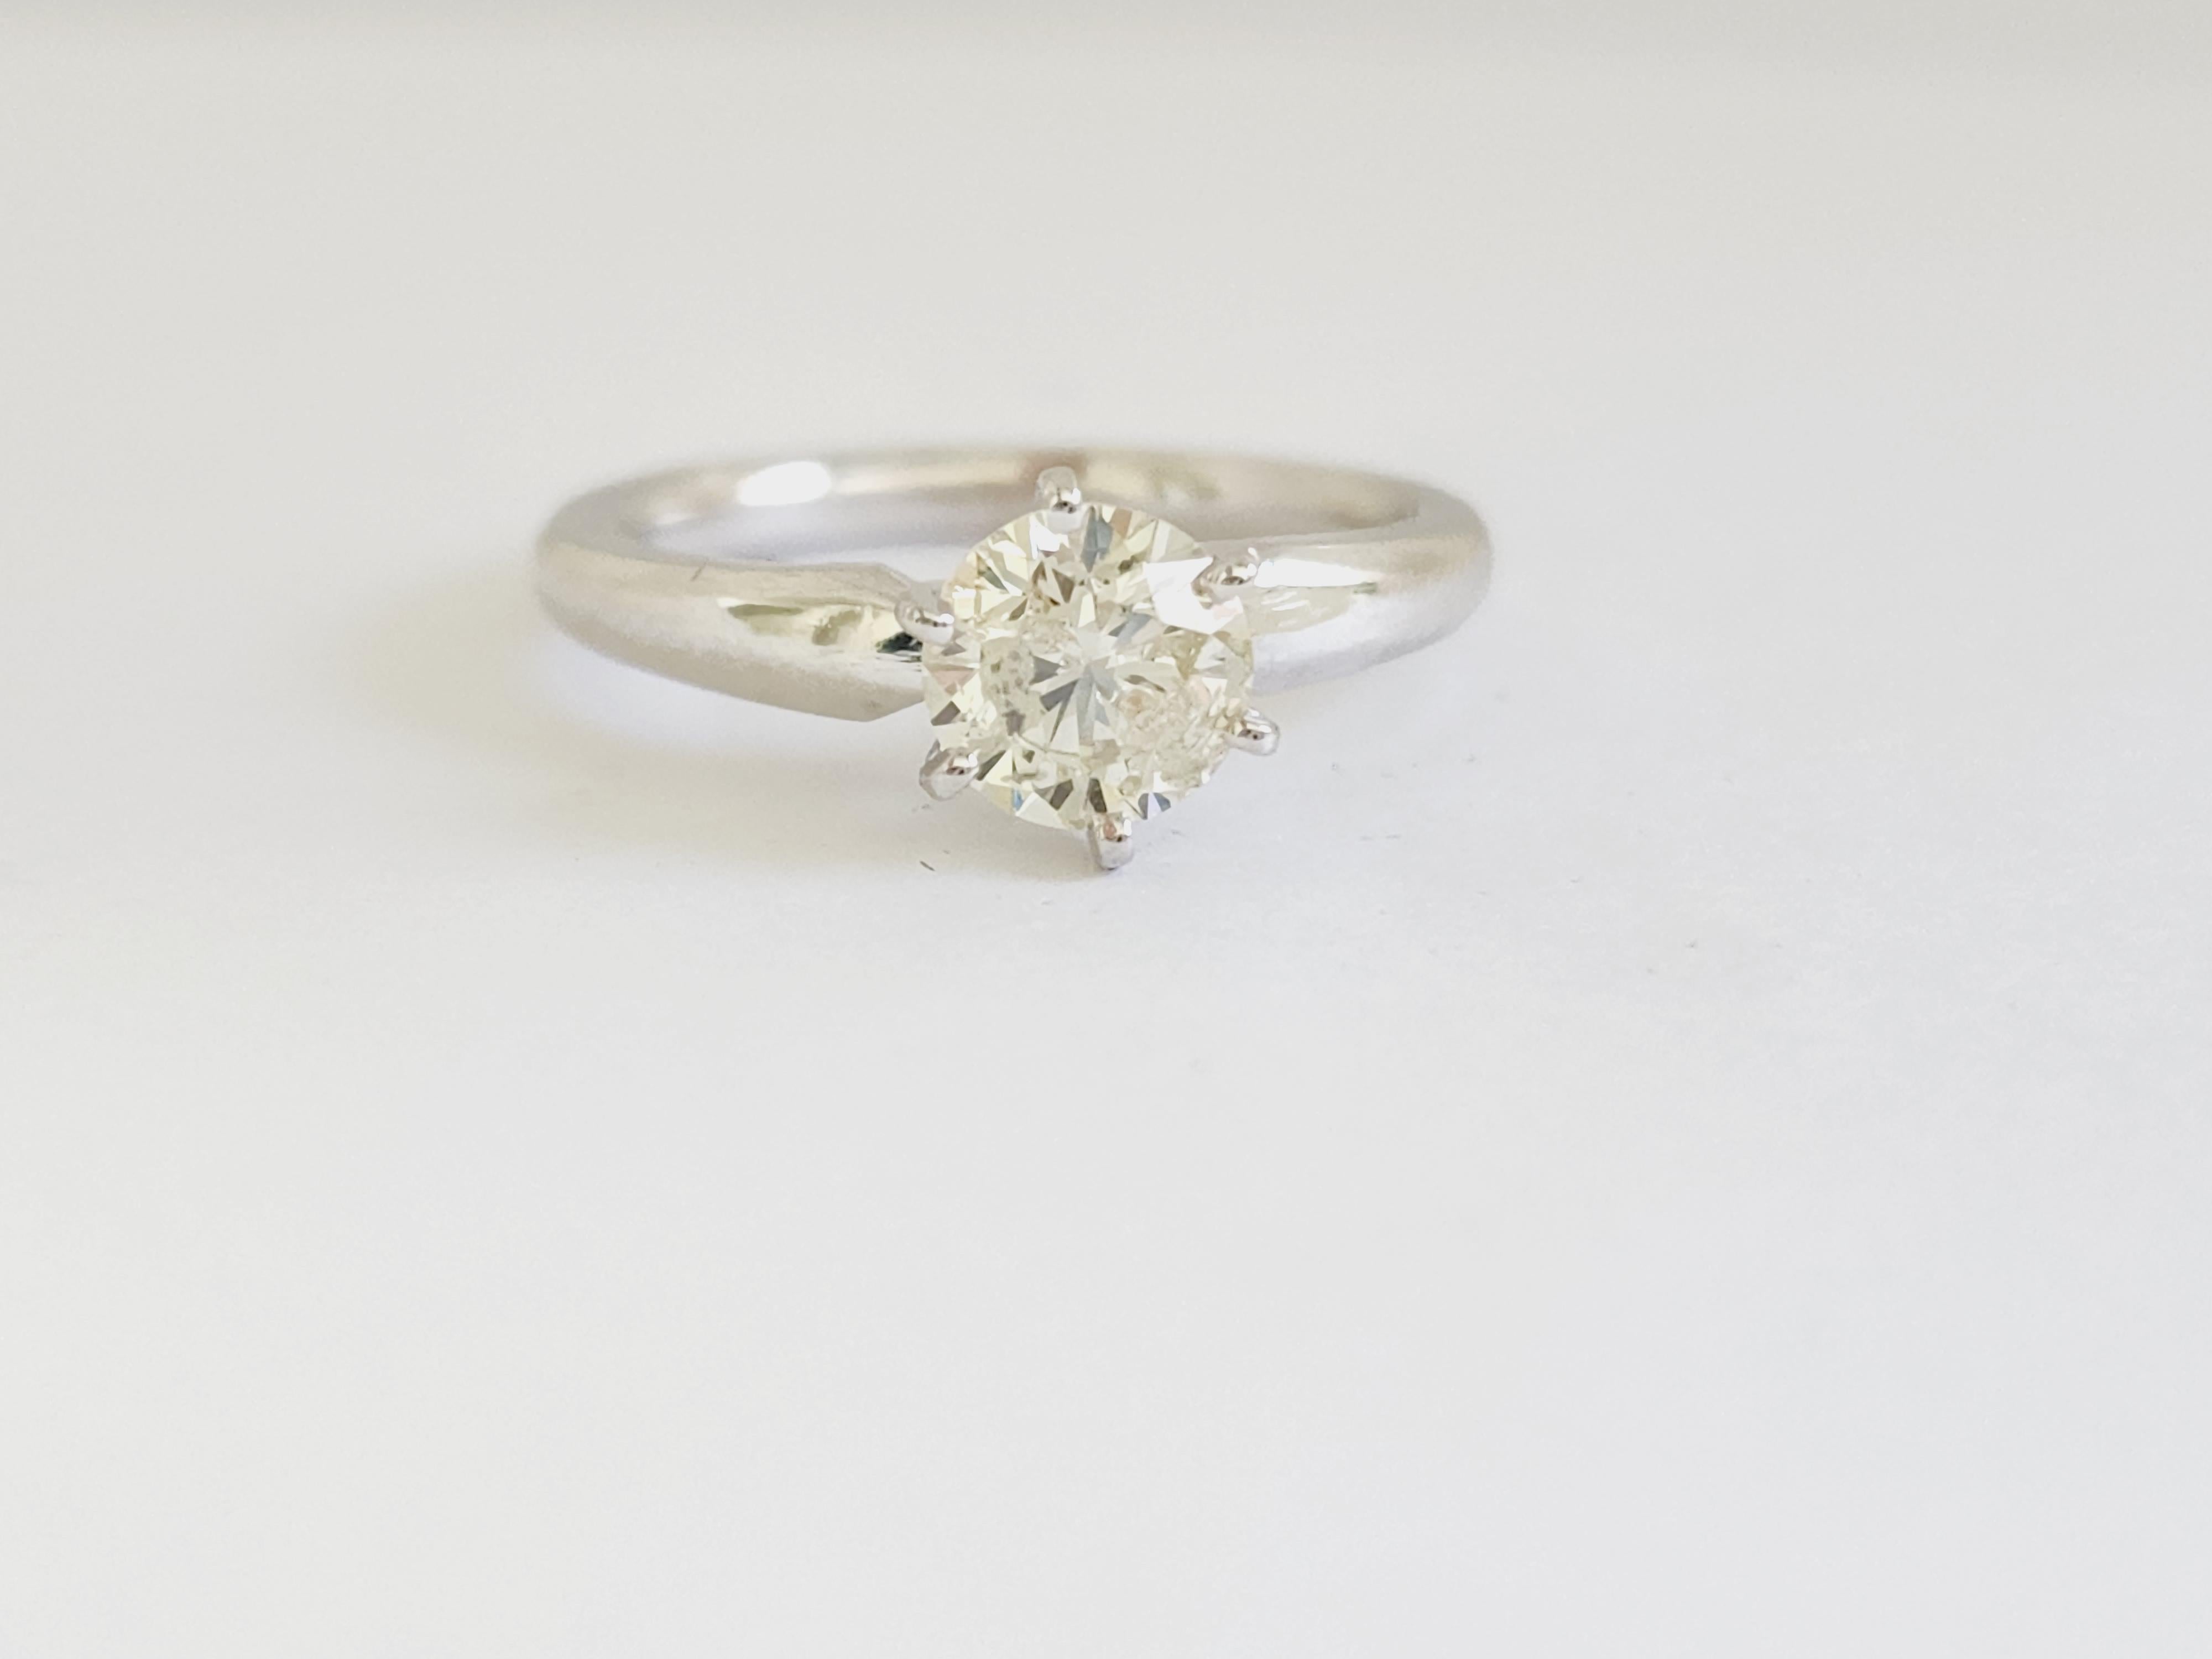 1.07 ct round brilliant cut natural diamonds. 6 prong solitaire setting, set in 14k white gold. Ring Size 6.5